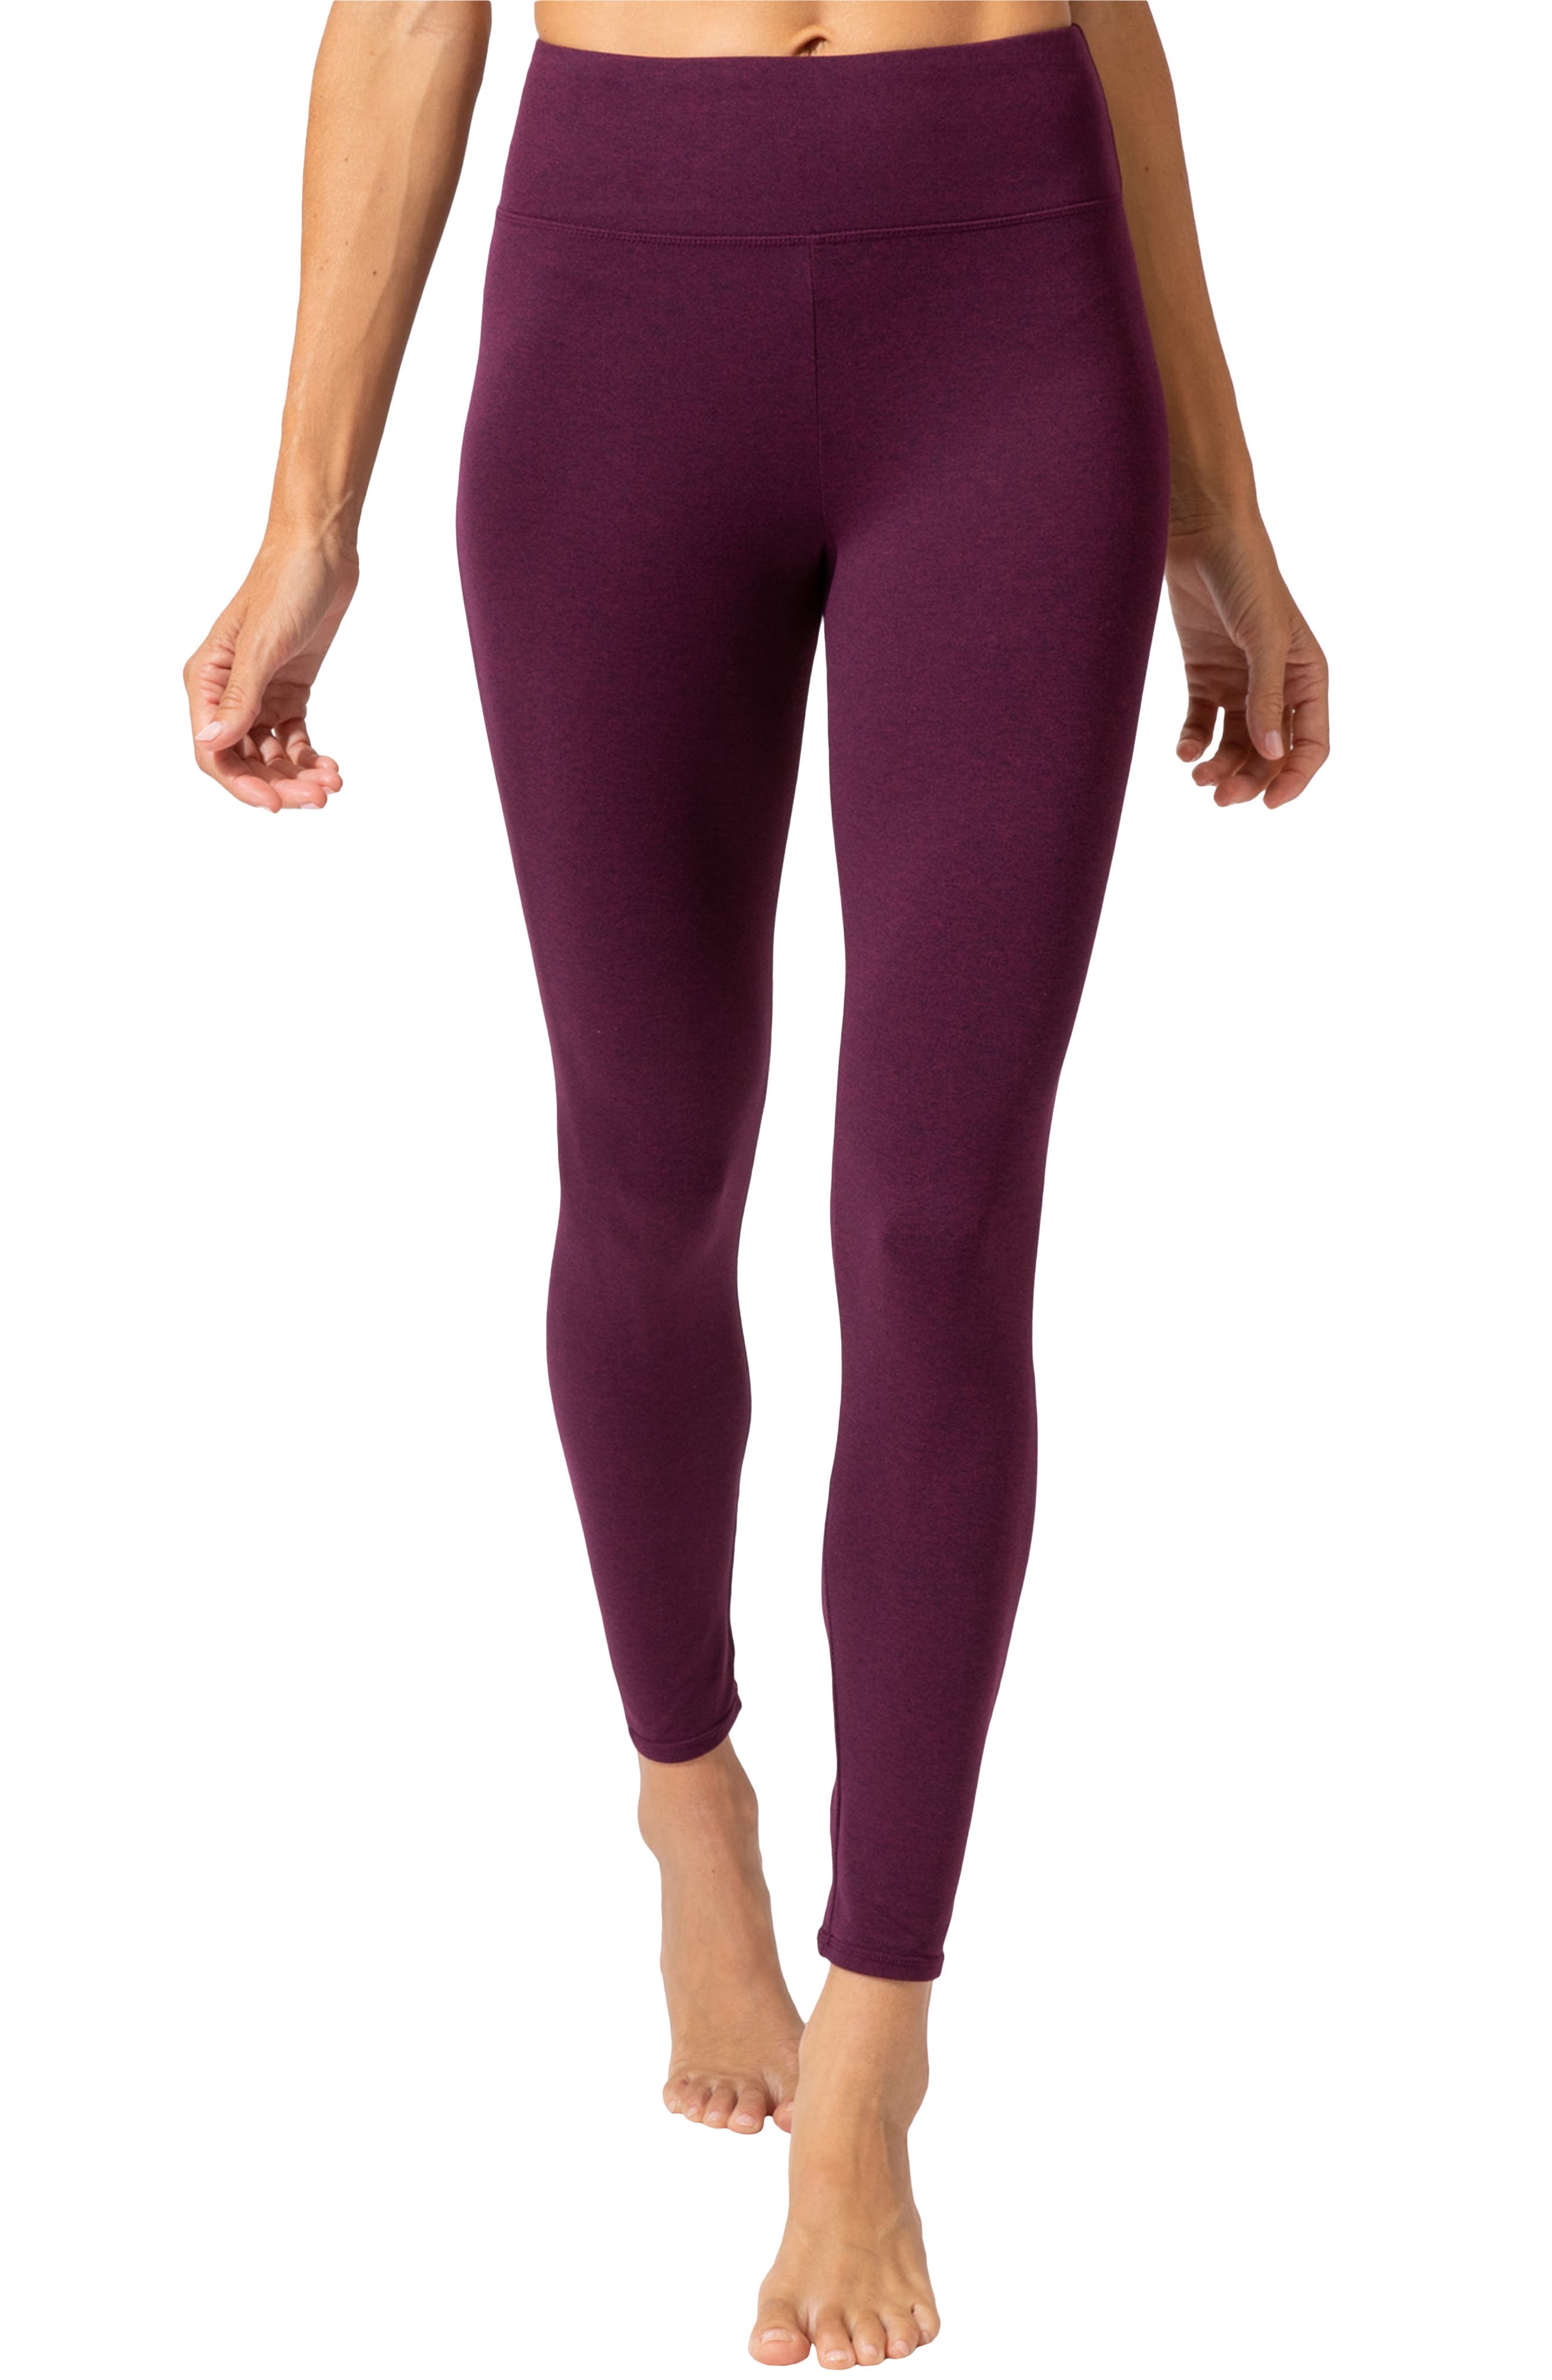 Purple Yoga Pants 32 inseam Hand Dyed from The ArtiZan Collection with Optional Hand Painted Design Including Plus Sizes